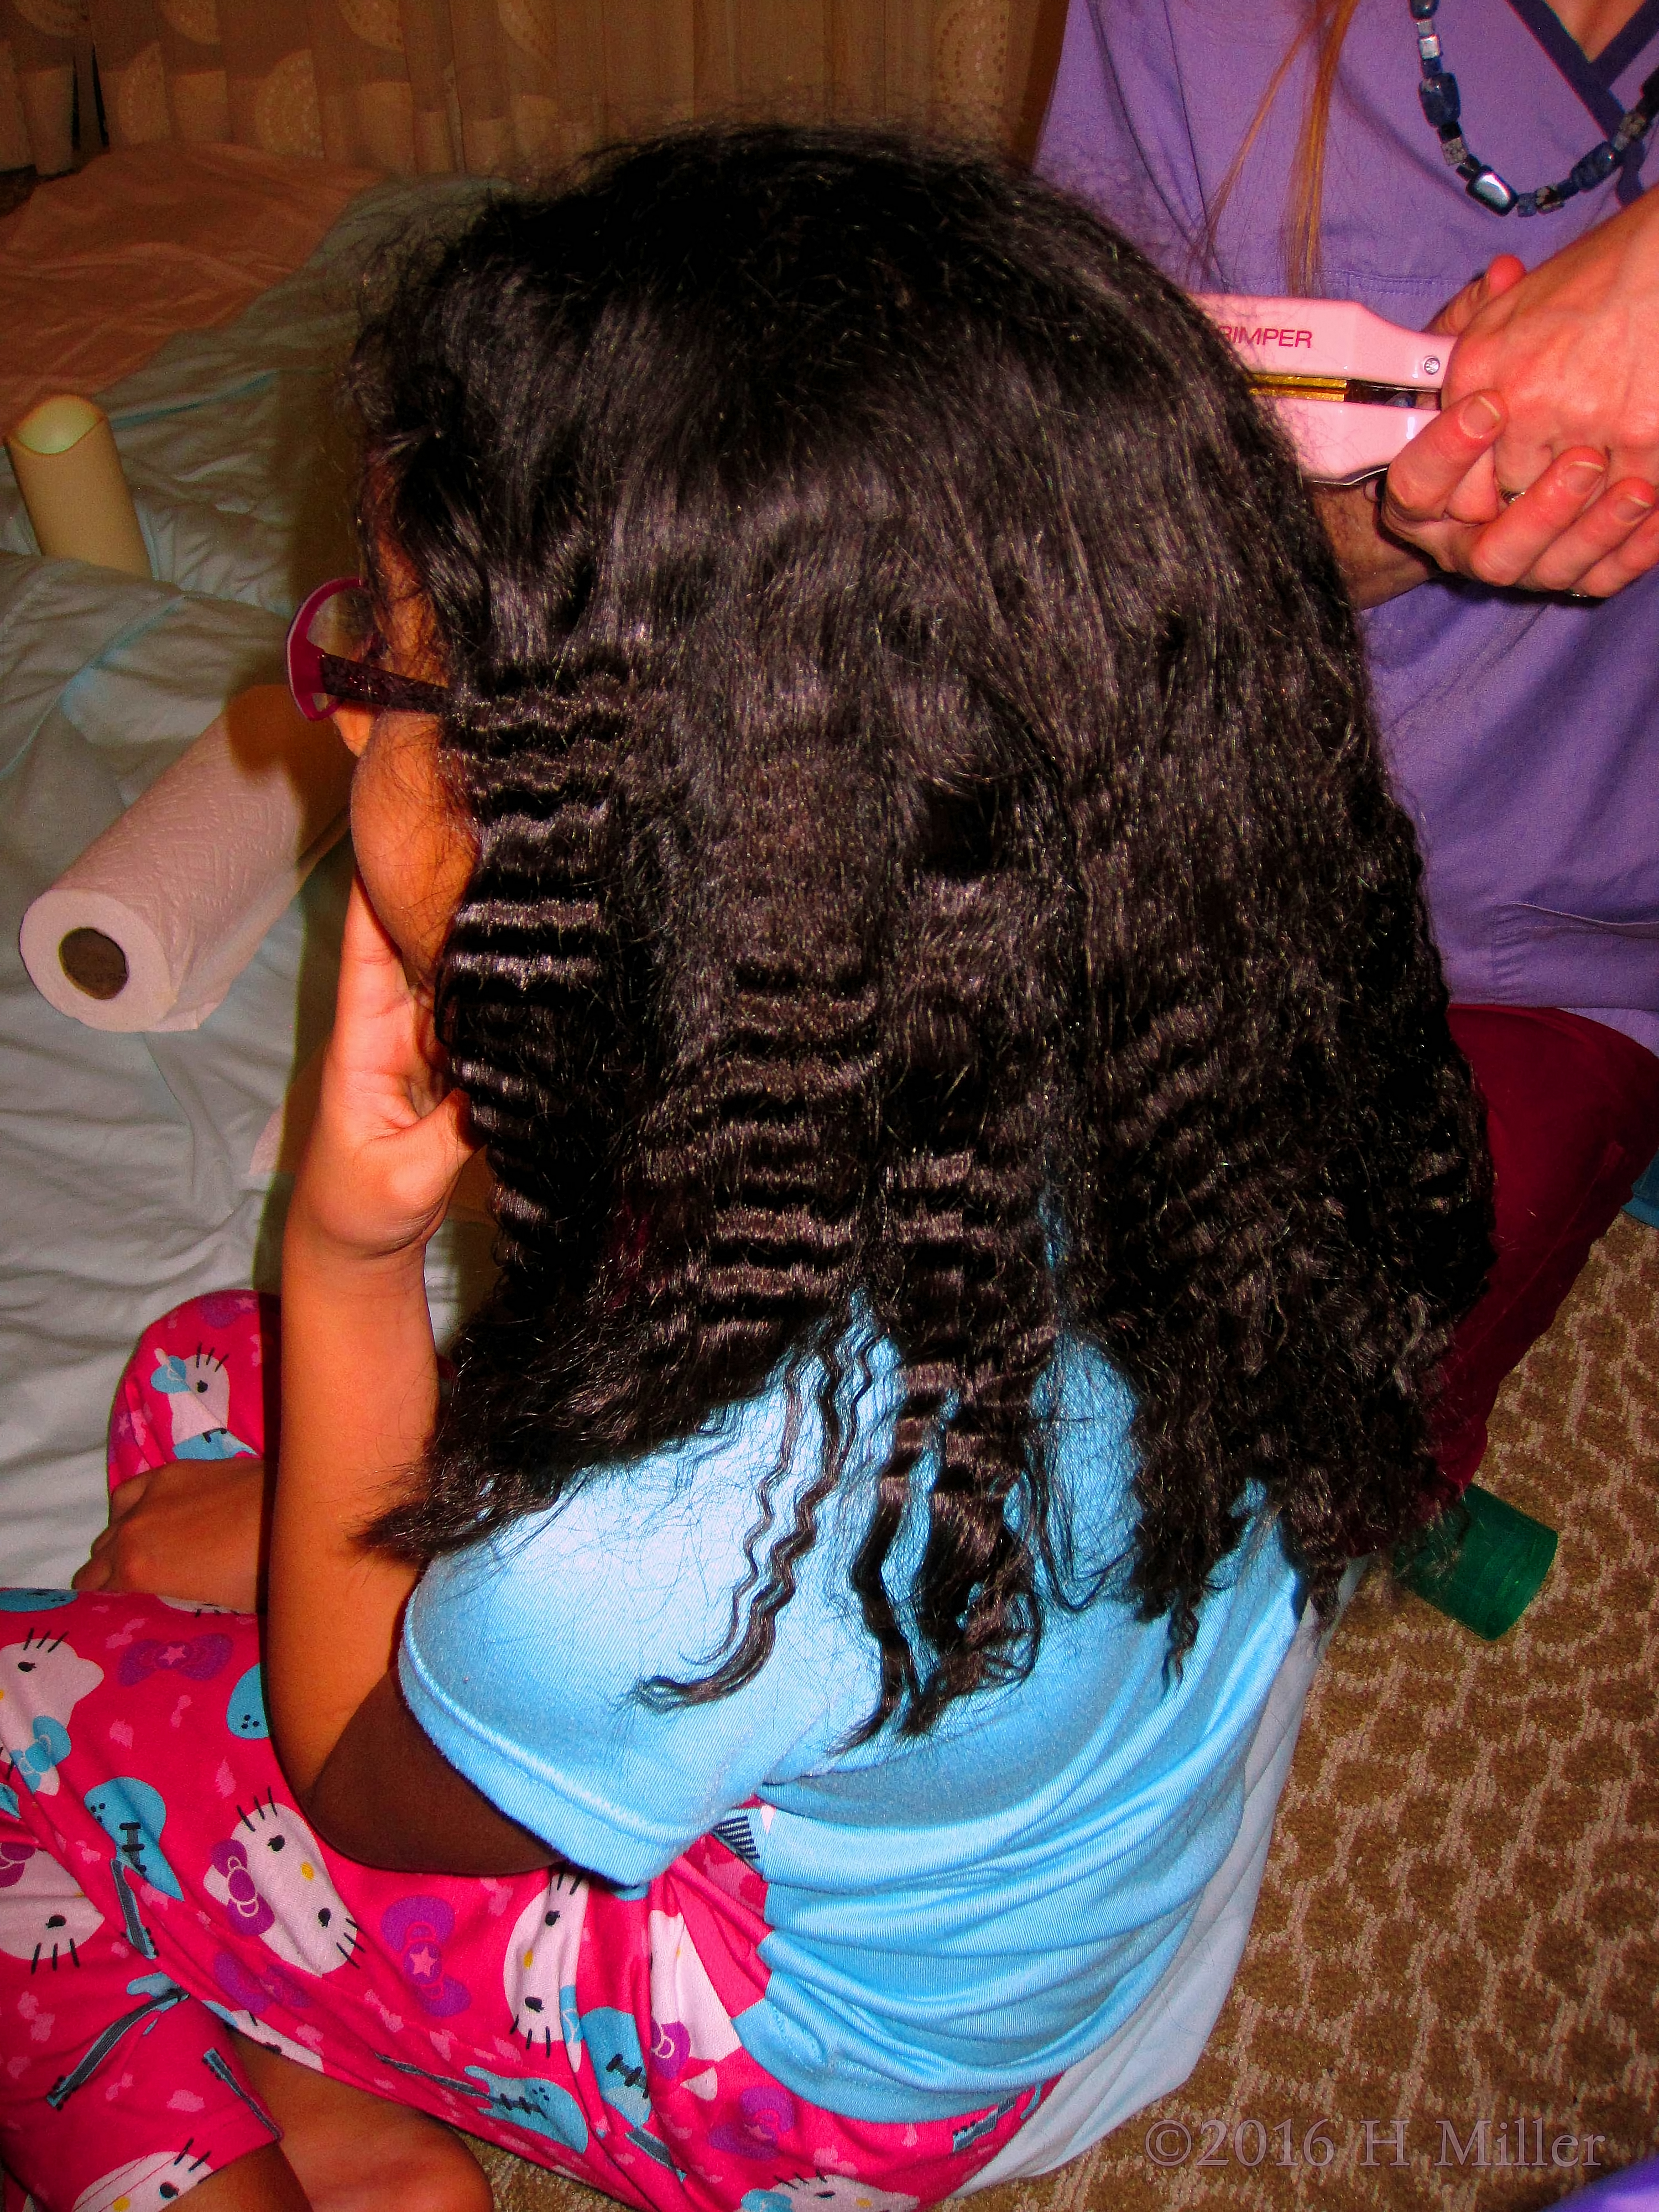 Crimped Hair Girls Hairstyle From The Back At The Spa Party